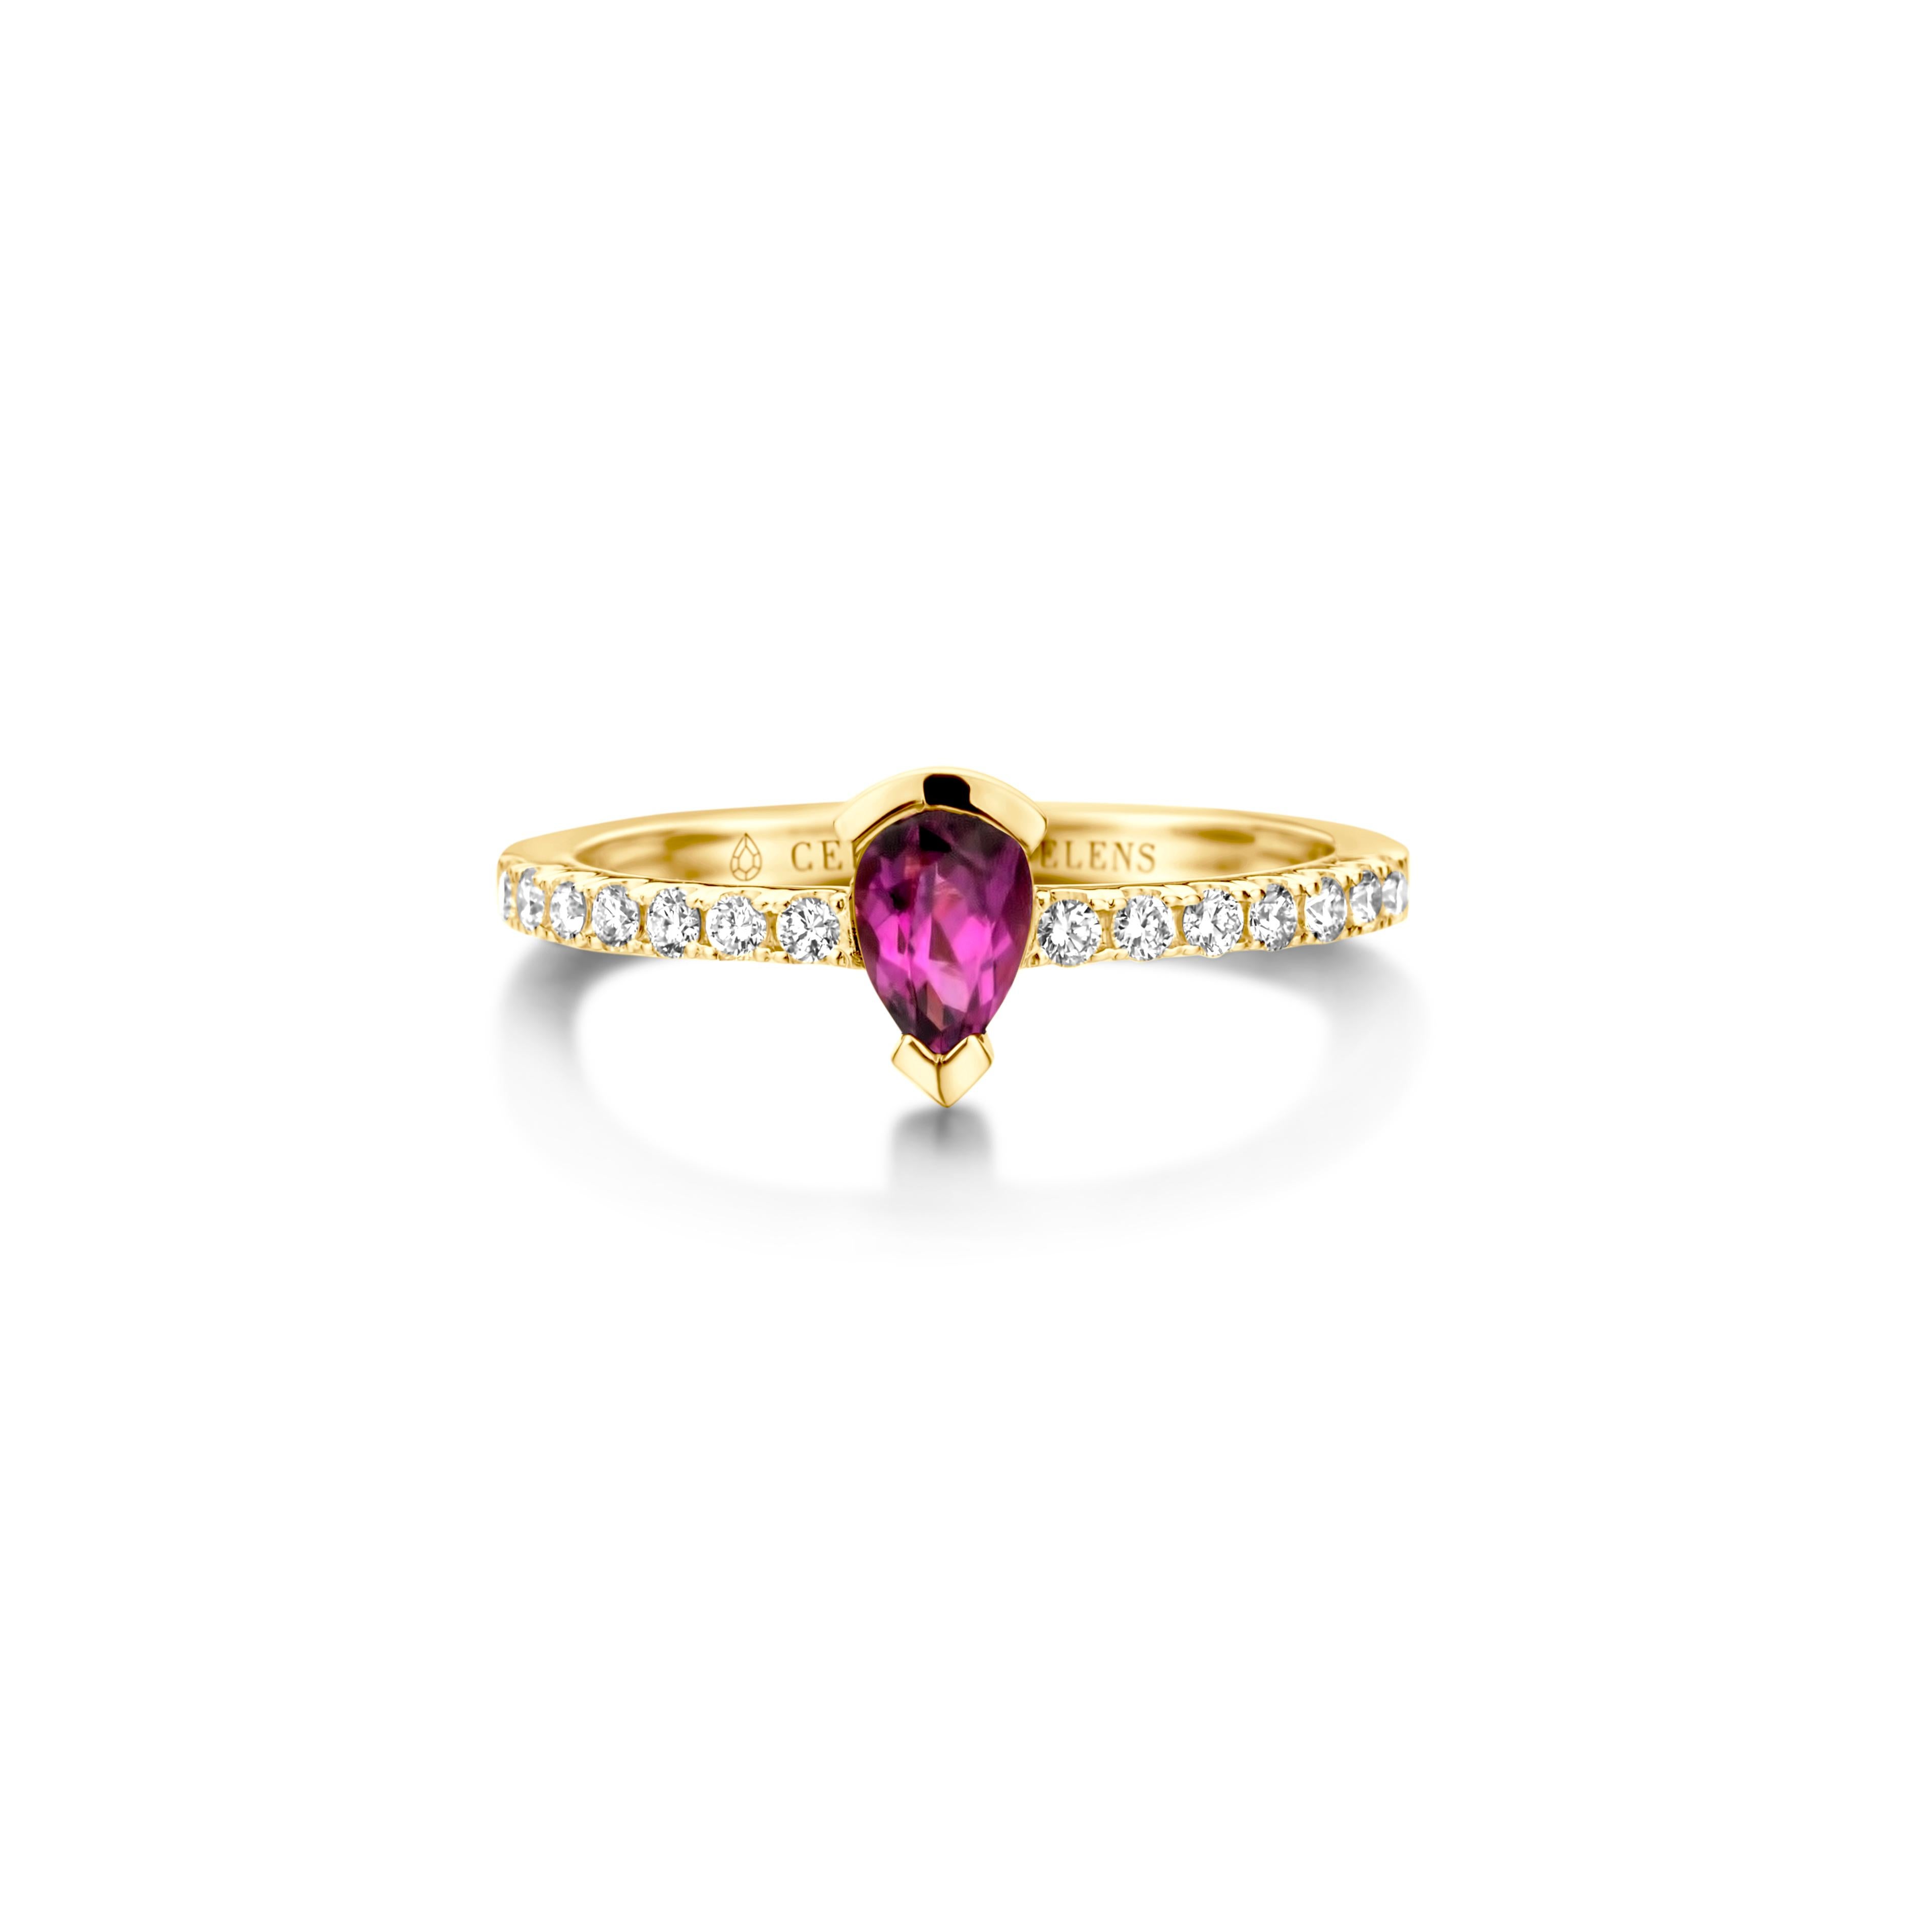 Adeline Straight ring in 18Kt rose gold set with a pear-shaped royal purple garnet and 0,24 Ct of white brilliant cut diamonds - VS F quality. Also, available in yellow gold and white gold. Celine Roelens, a goldsmith and gemologist, is specialized